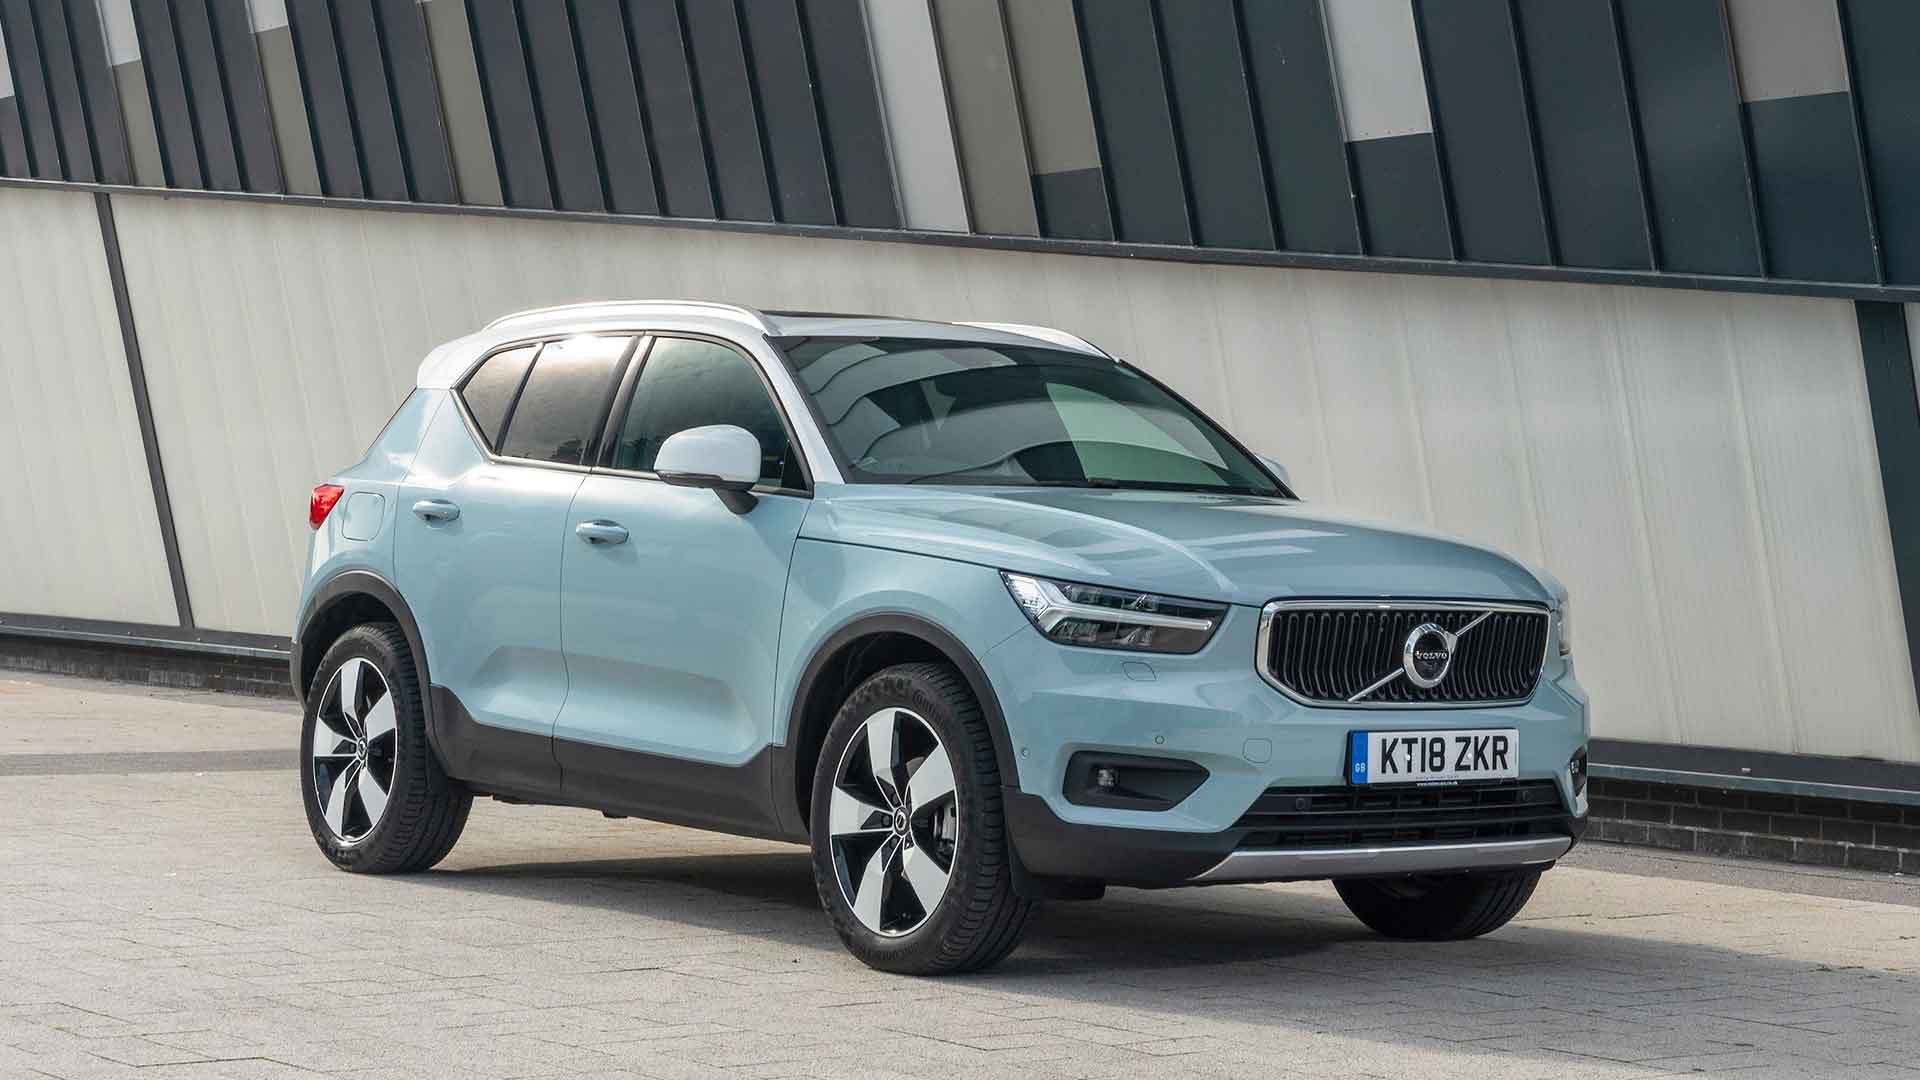 Experts pick the 10 safest new cars of 2019 Motoring Research